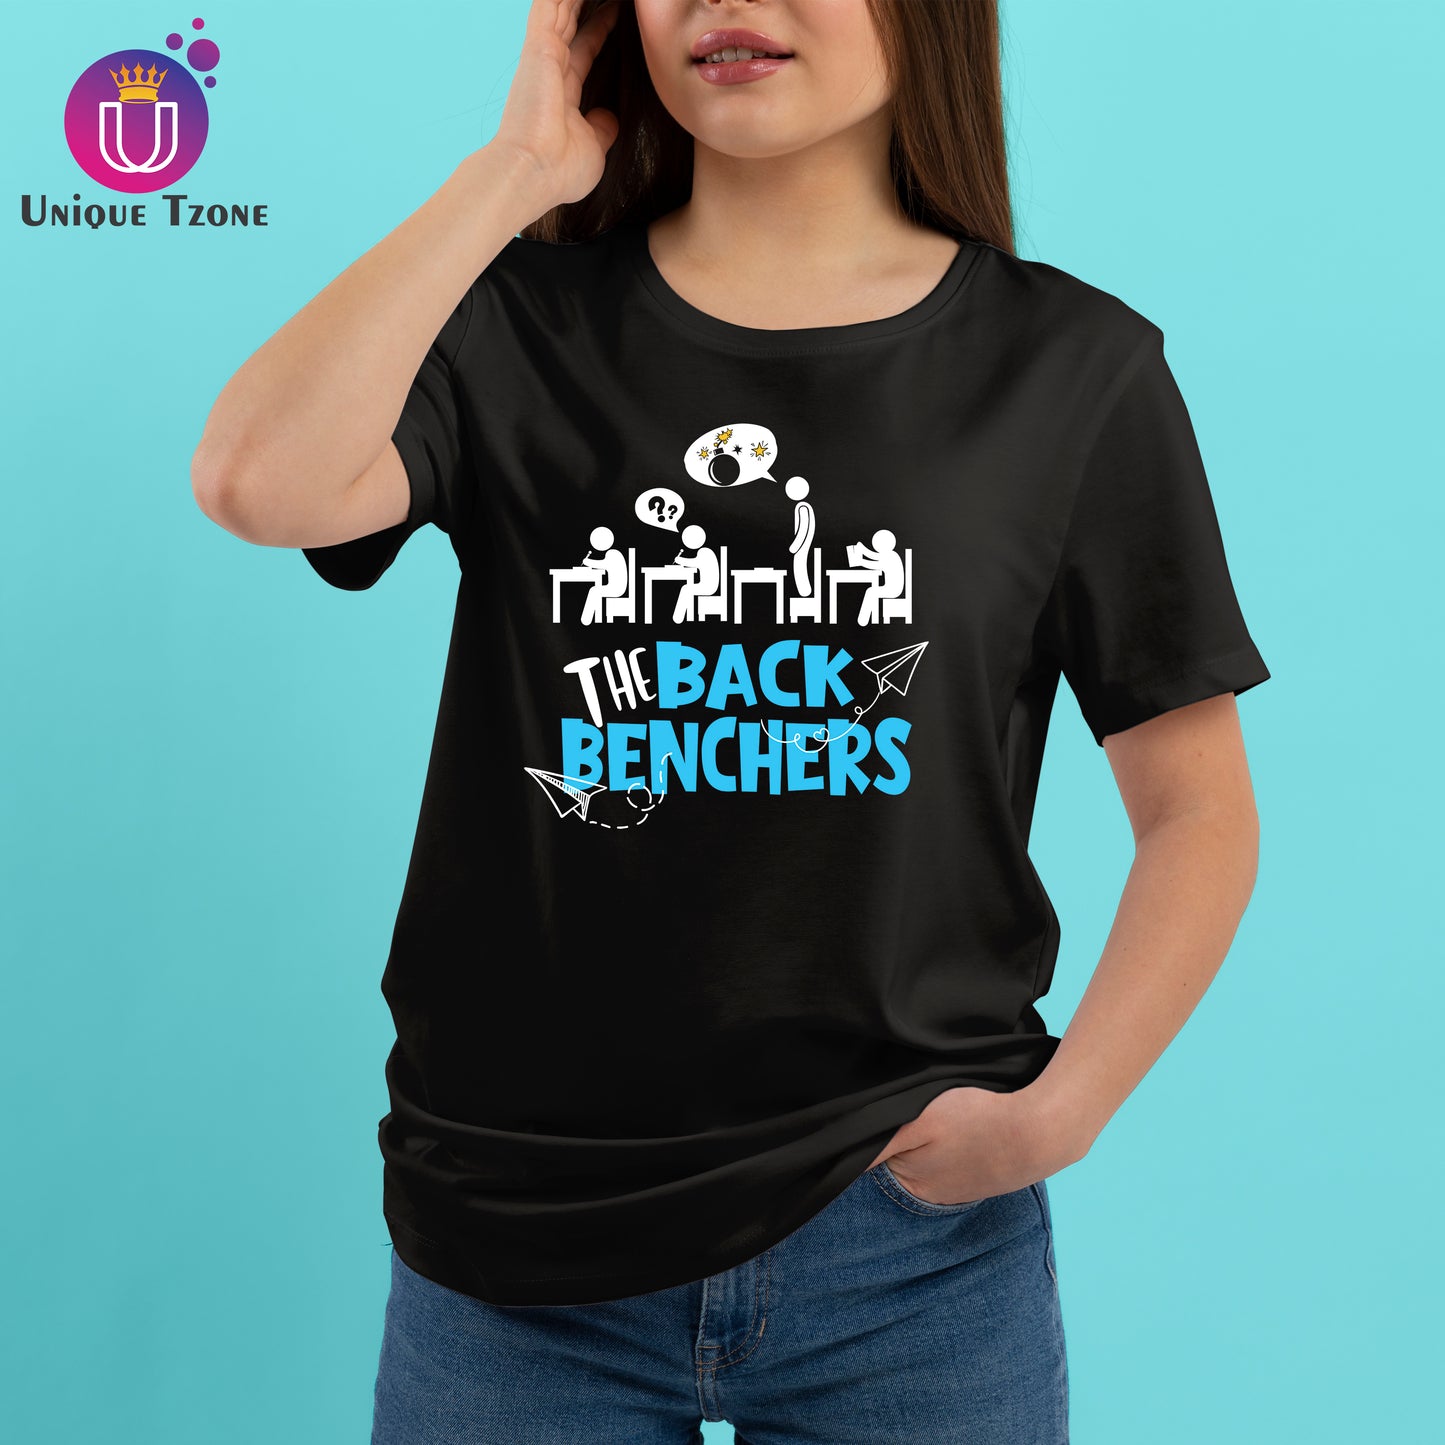 The Back Benchers Round Neck Cotton T-shirt